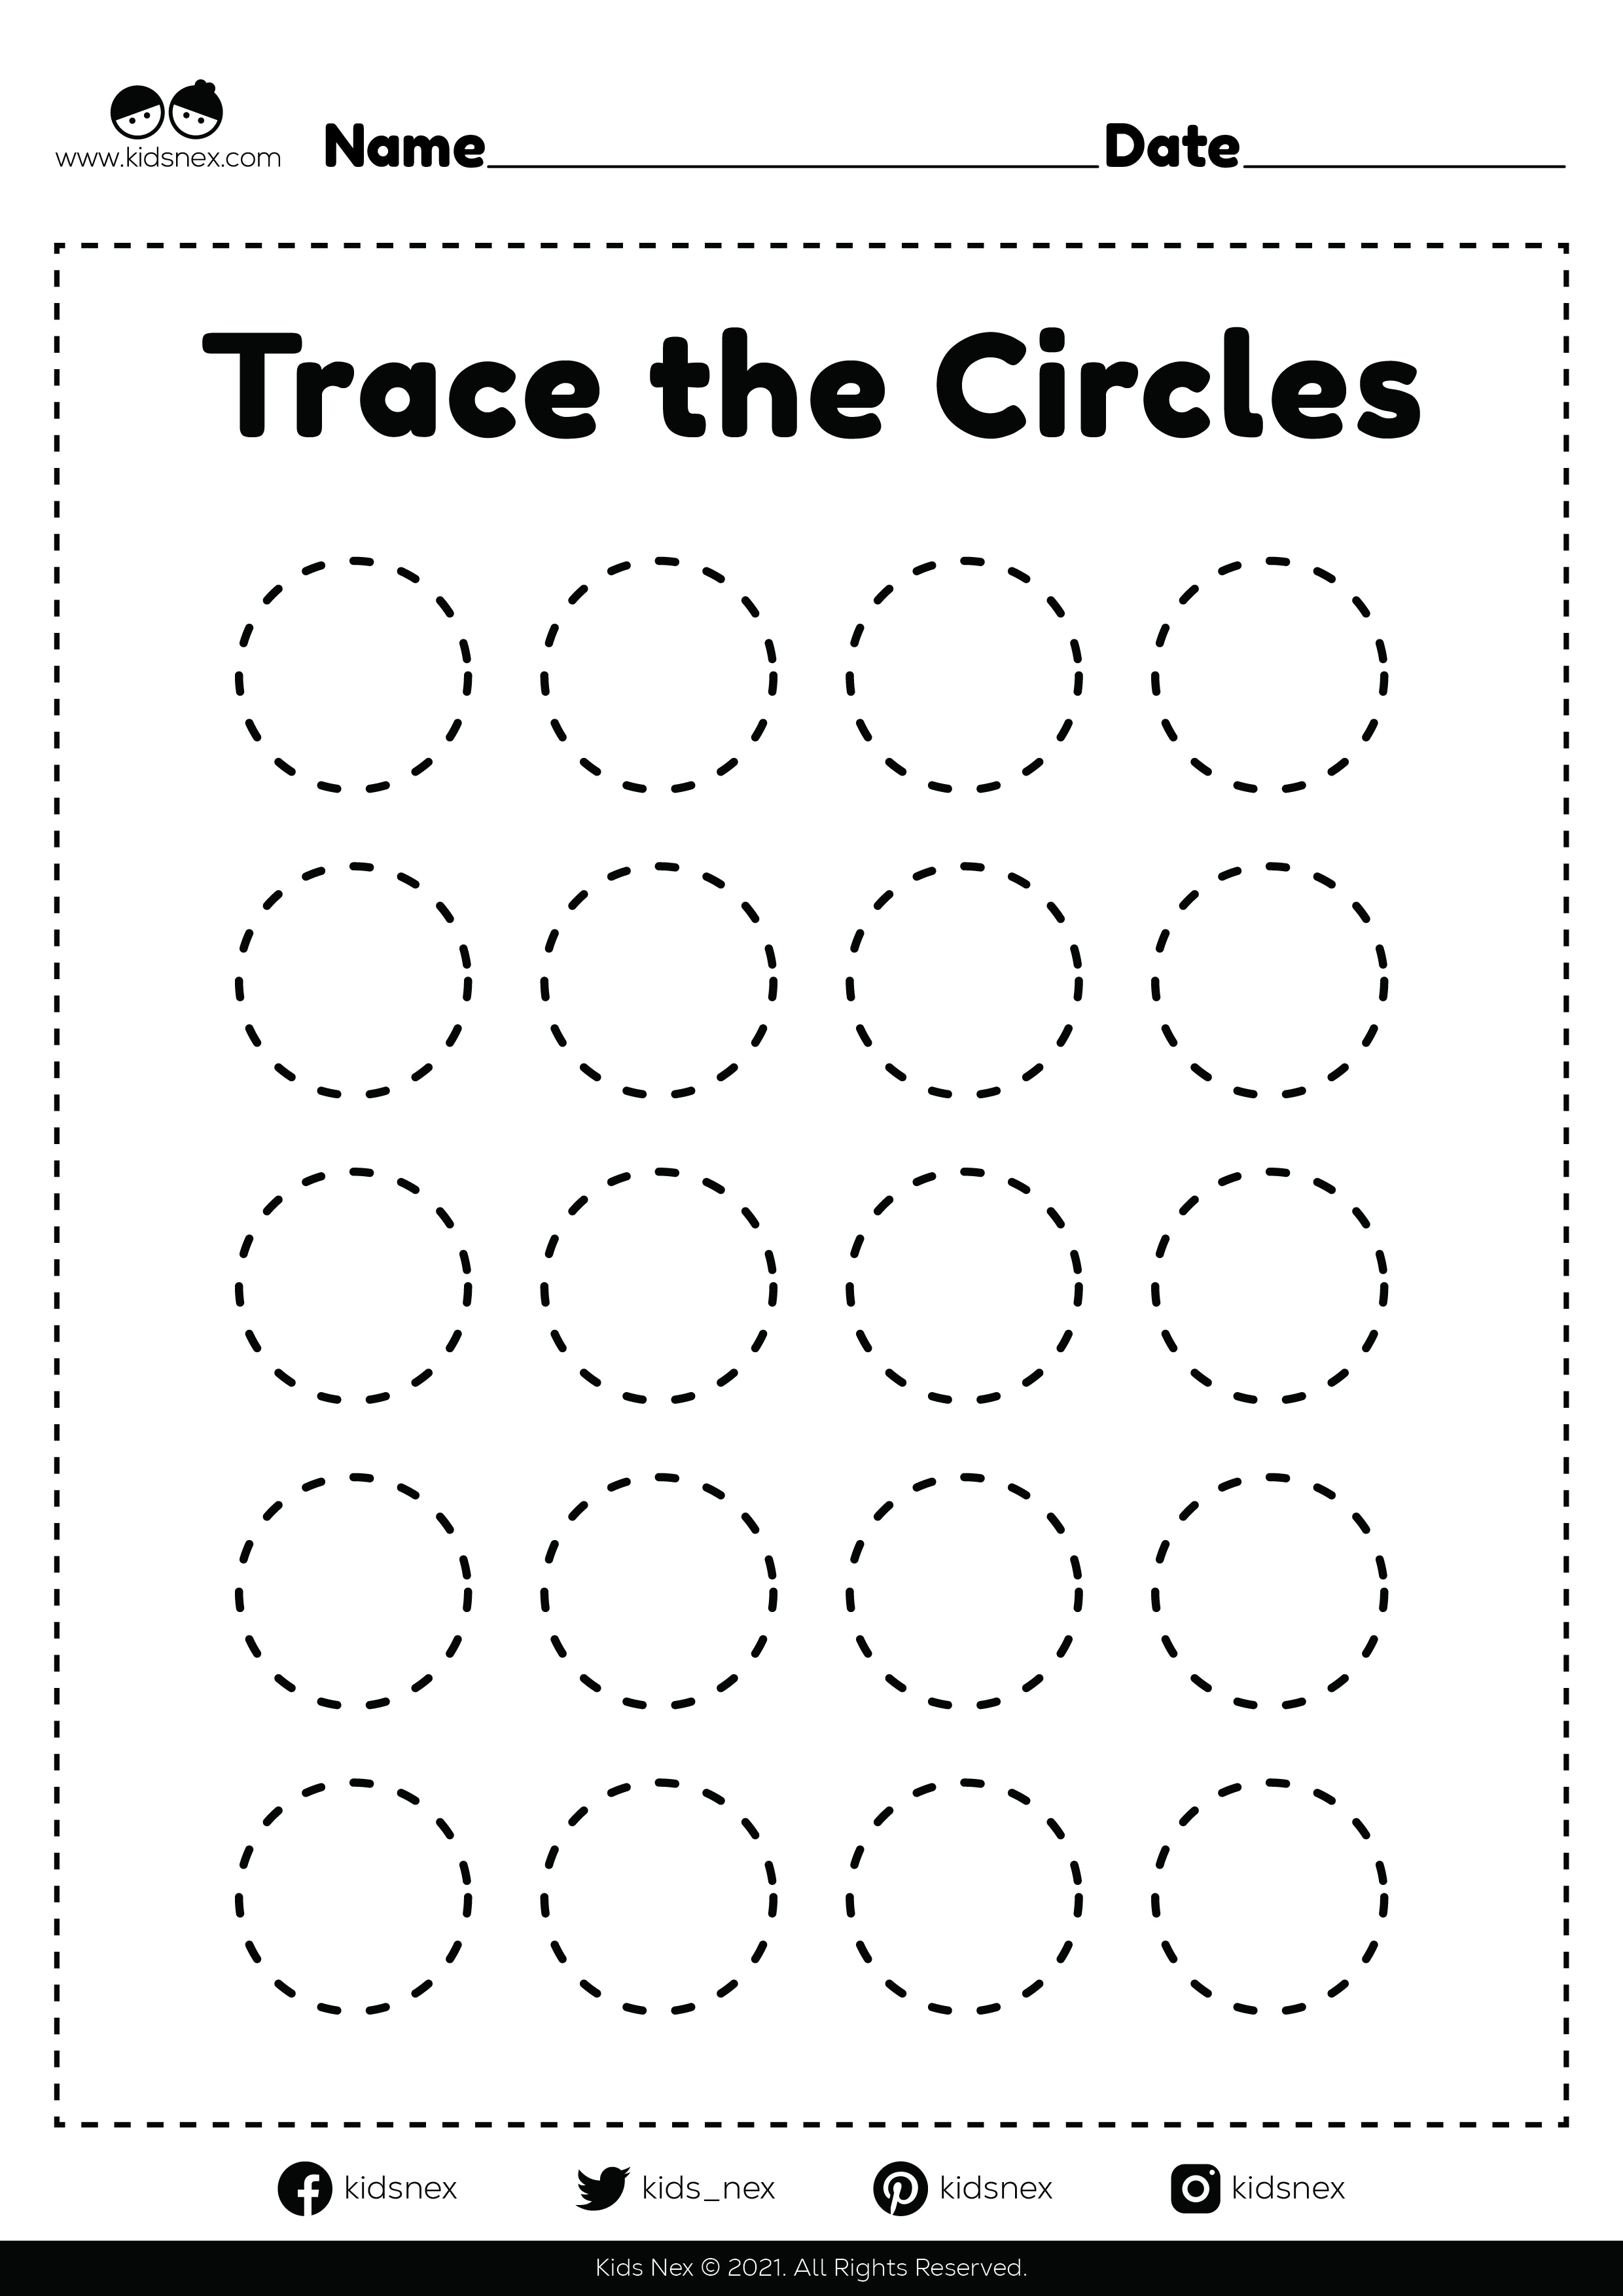 Circle shape worksheet free printable for kindergarten and preschool kids for daily fun and activities.